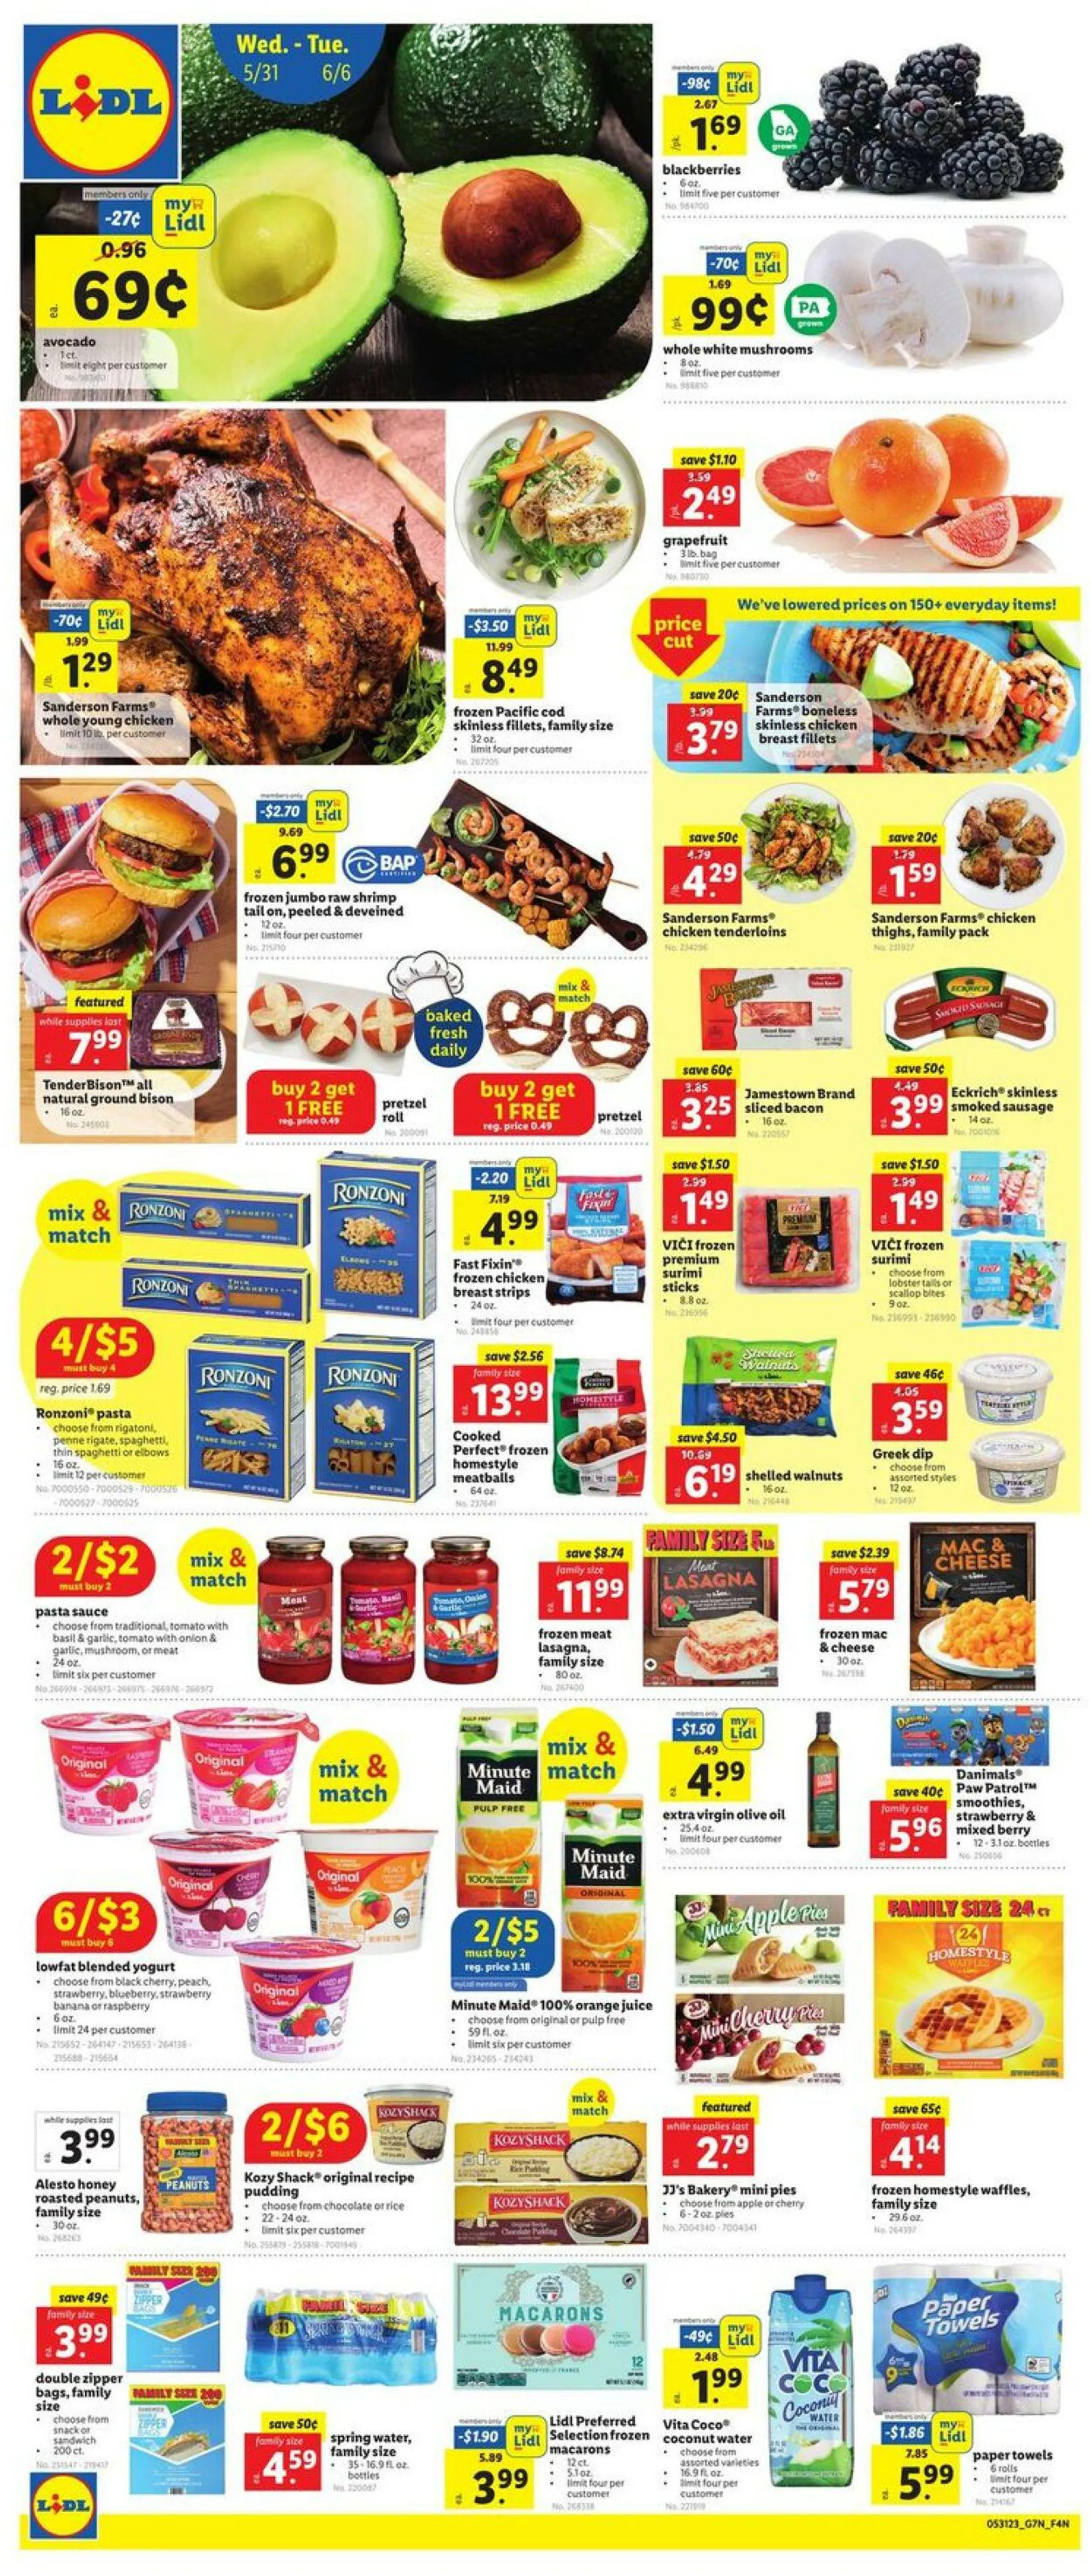 Lidl Current weekly ad - 1